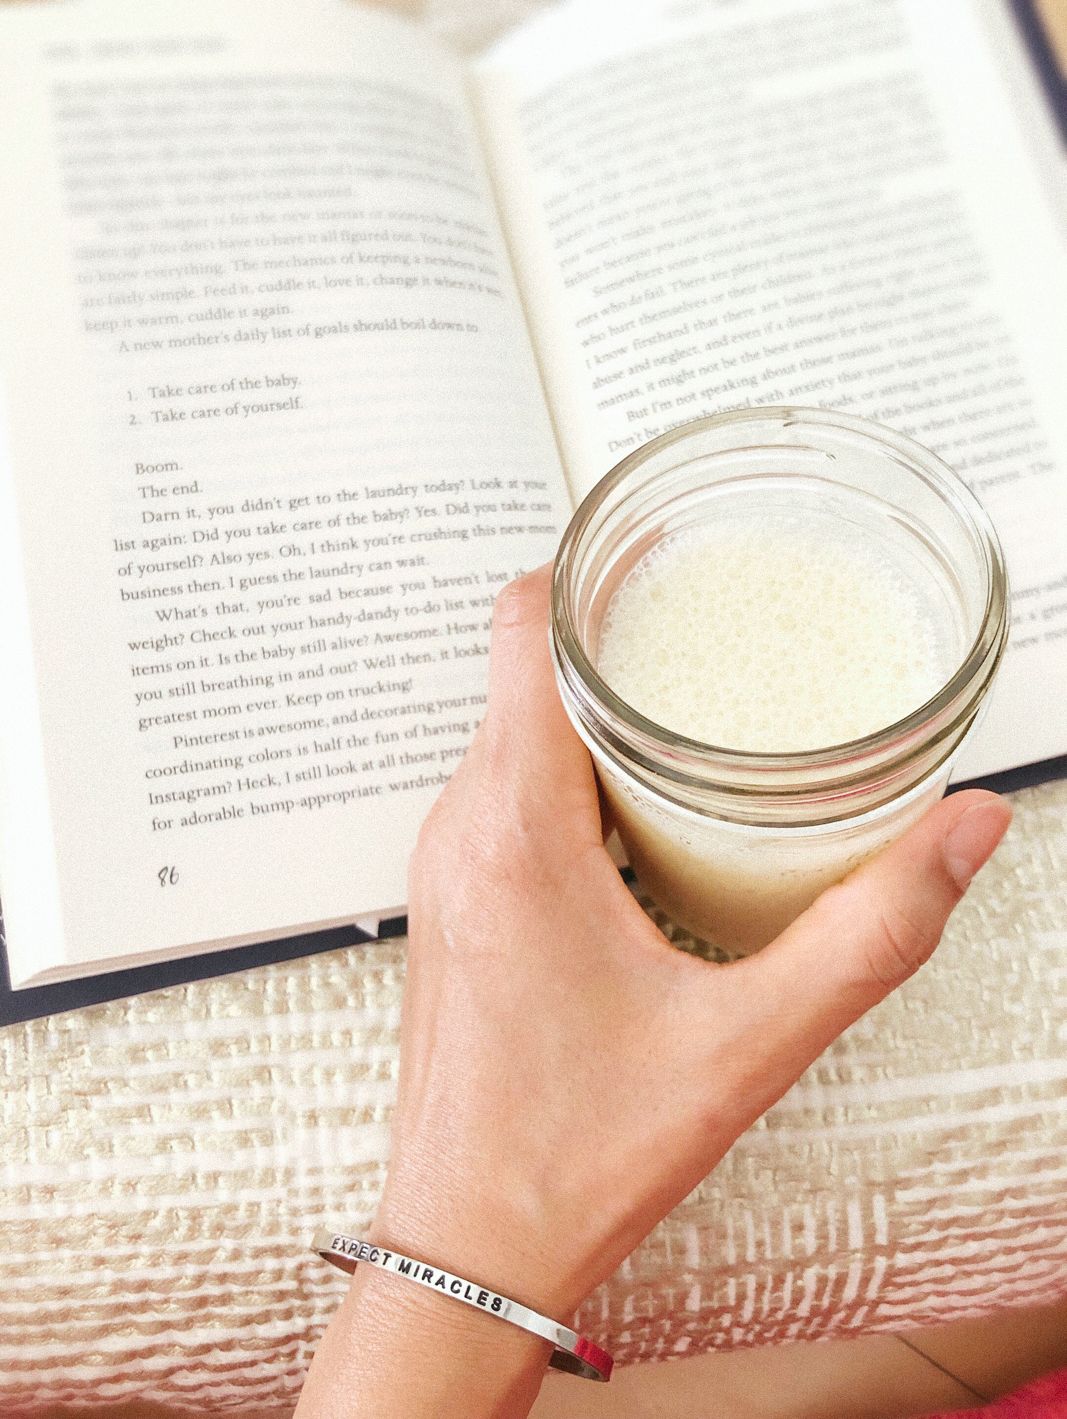 From the Mantra Kitchen: How to Make Almond Milk